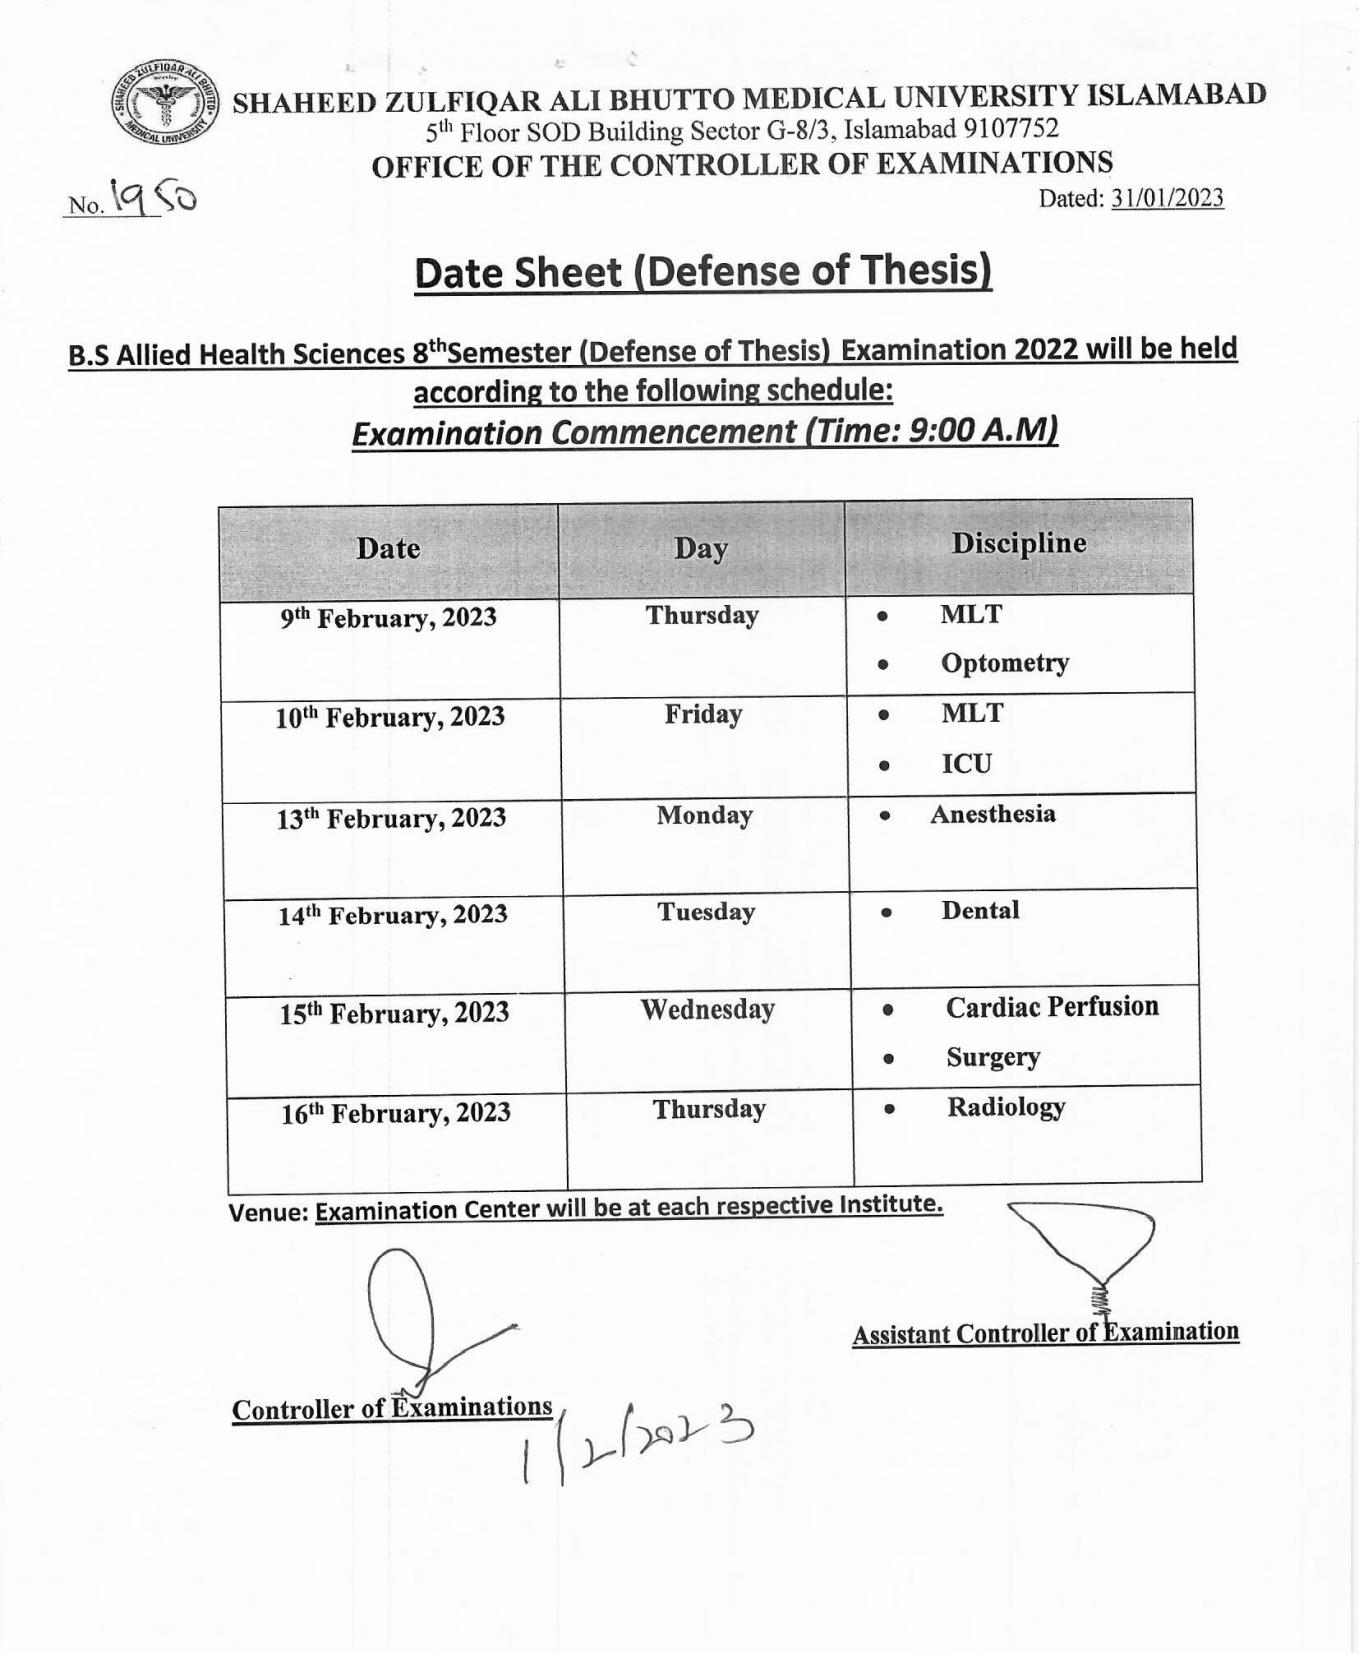 Date Sheet - BS AHS 8th Semester Defense of Thesis Examination 2022